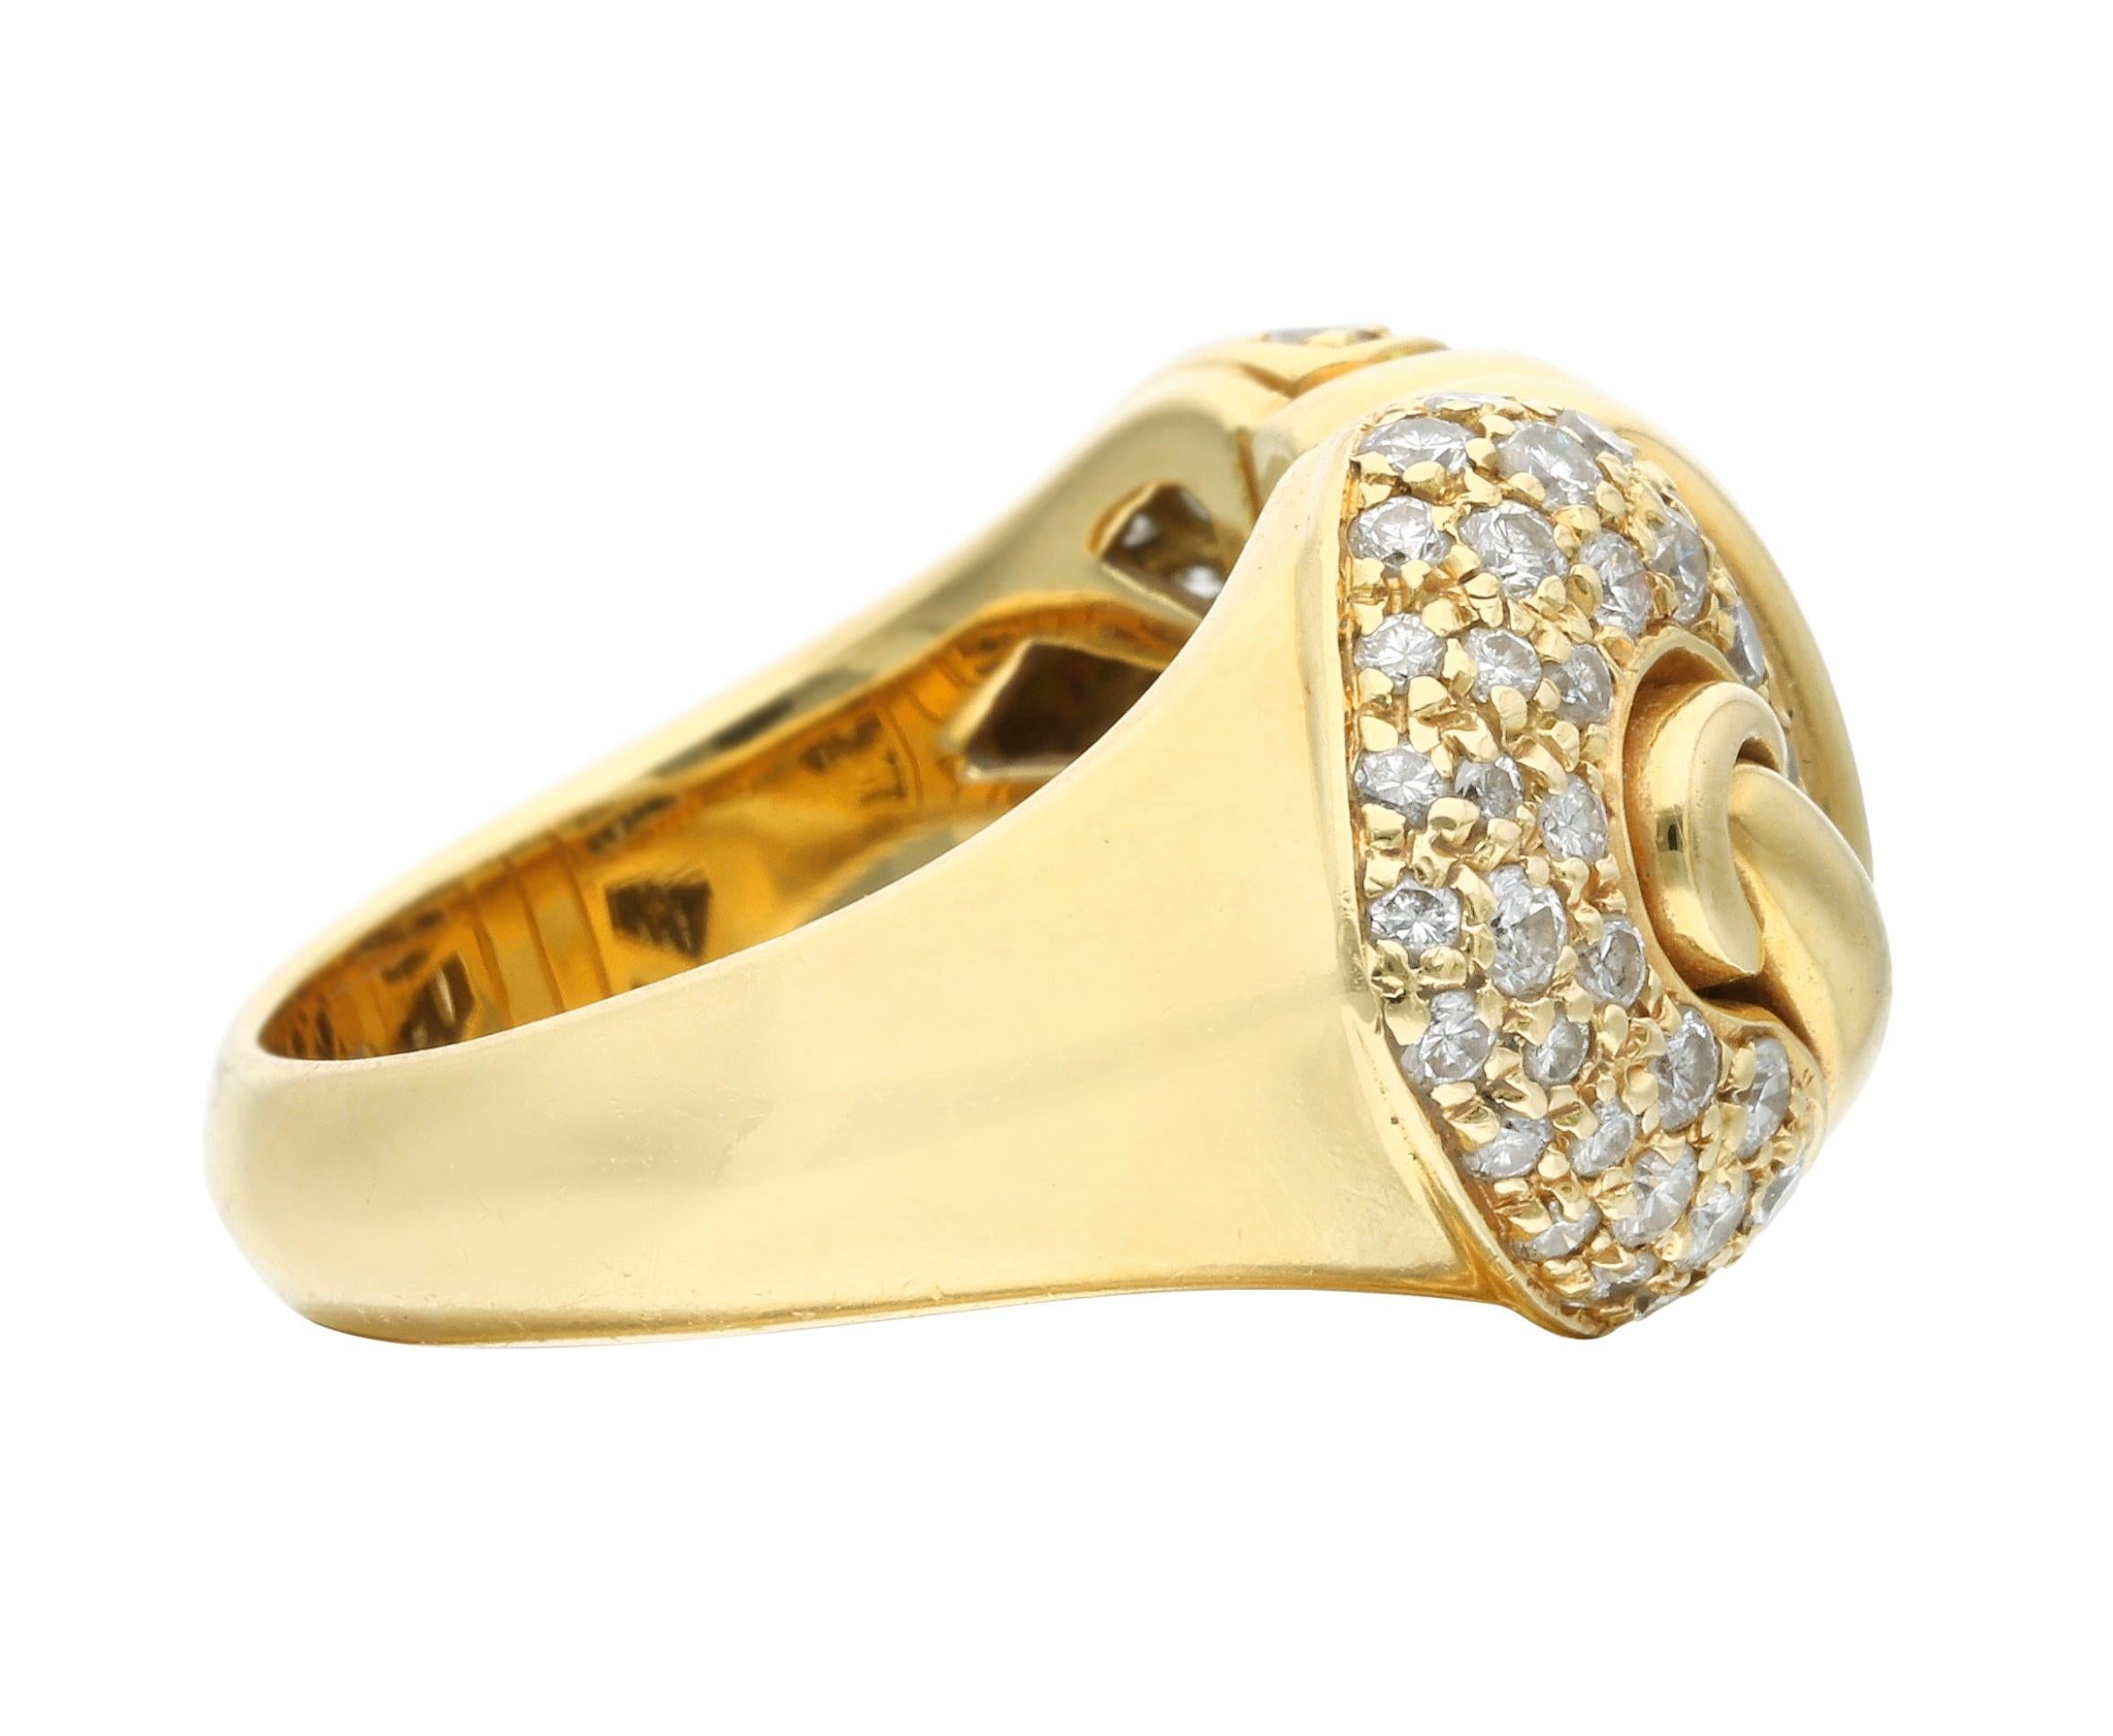 Composed of 66 round brilliant cut diamonds.

- Round brilliant cut diamonds weigh a total of approximately 1.30 carats
- Signed with Bvlgari with serial number
- 18 karat yellow gold
- Total weight 16.91 grams
- Size 7.25

The condition report is